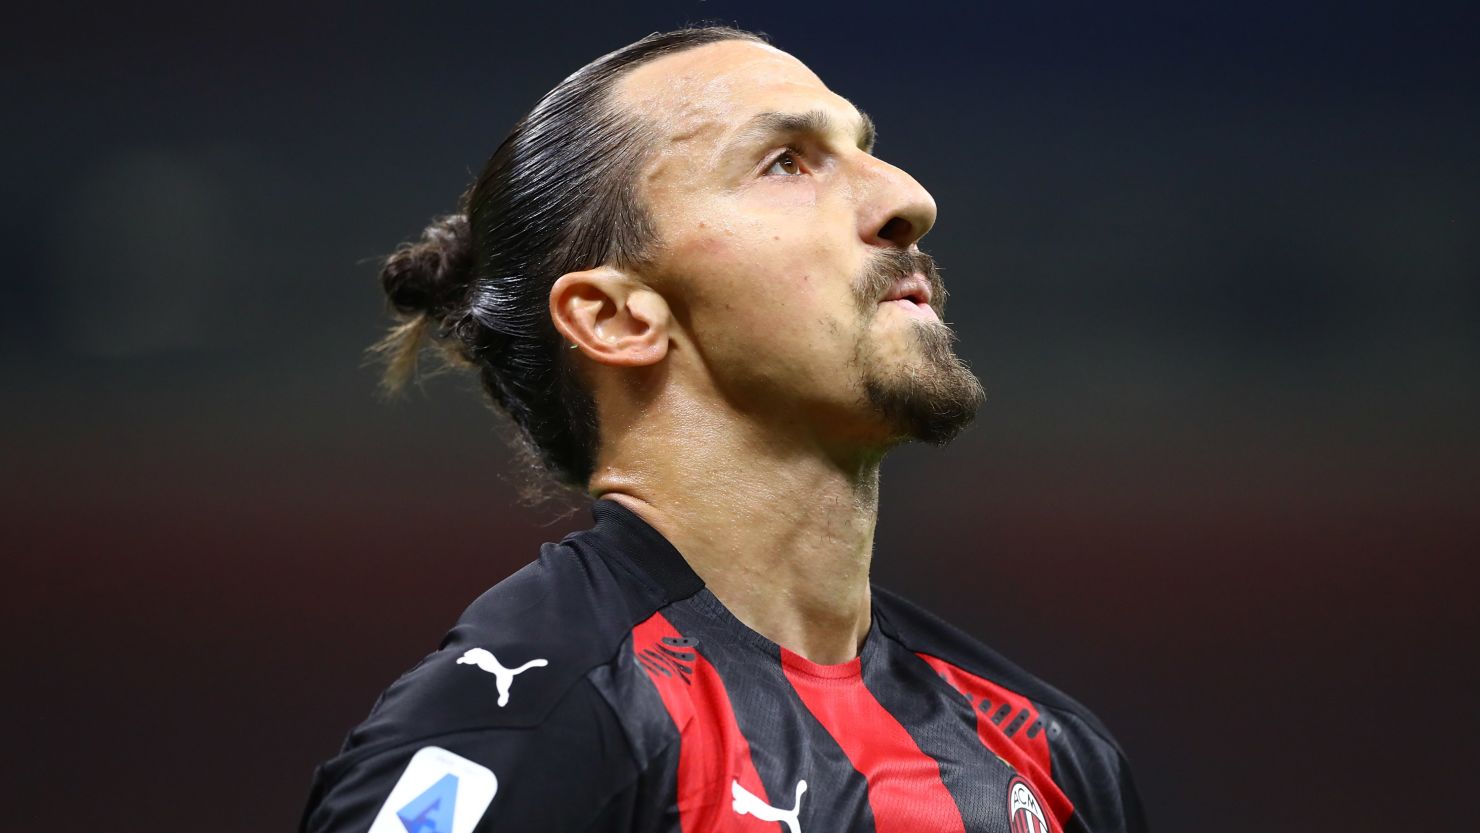 Zlatan Ibrahimović of AC Milan reacts during the Serie A match between AC Milan and Bologna FC at Stadio Giuseppe Meazza on September 21, 2020. Ibrahimović will miss Thursday's game against Bodø/Glimt.